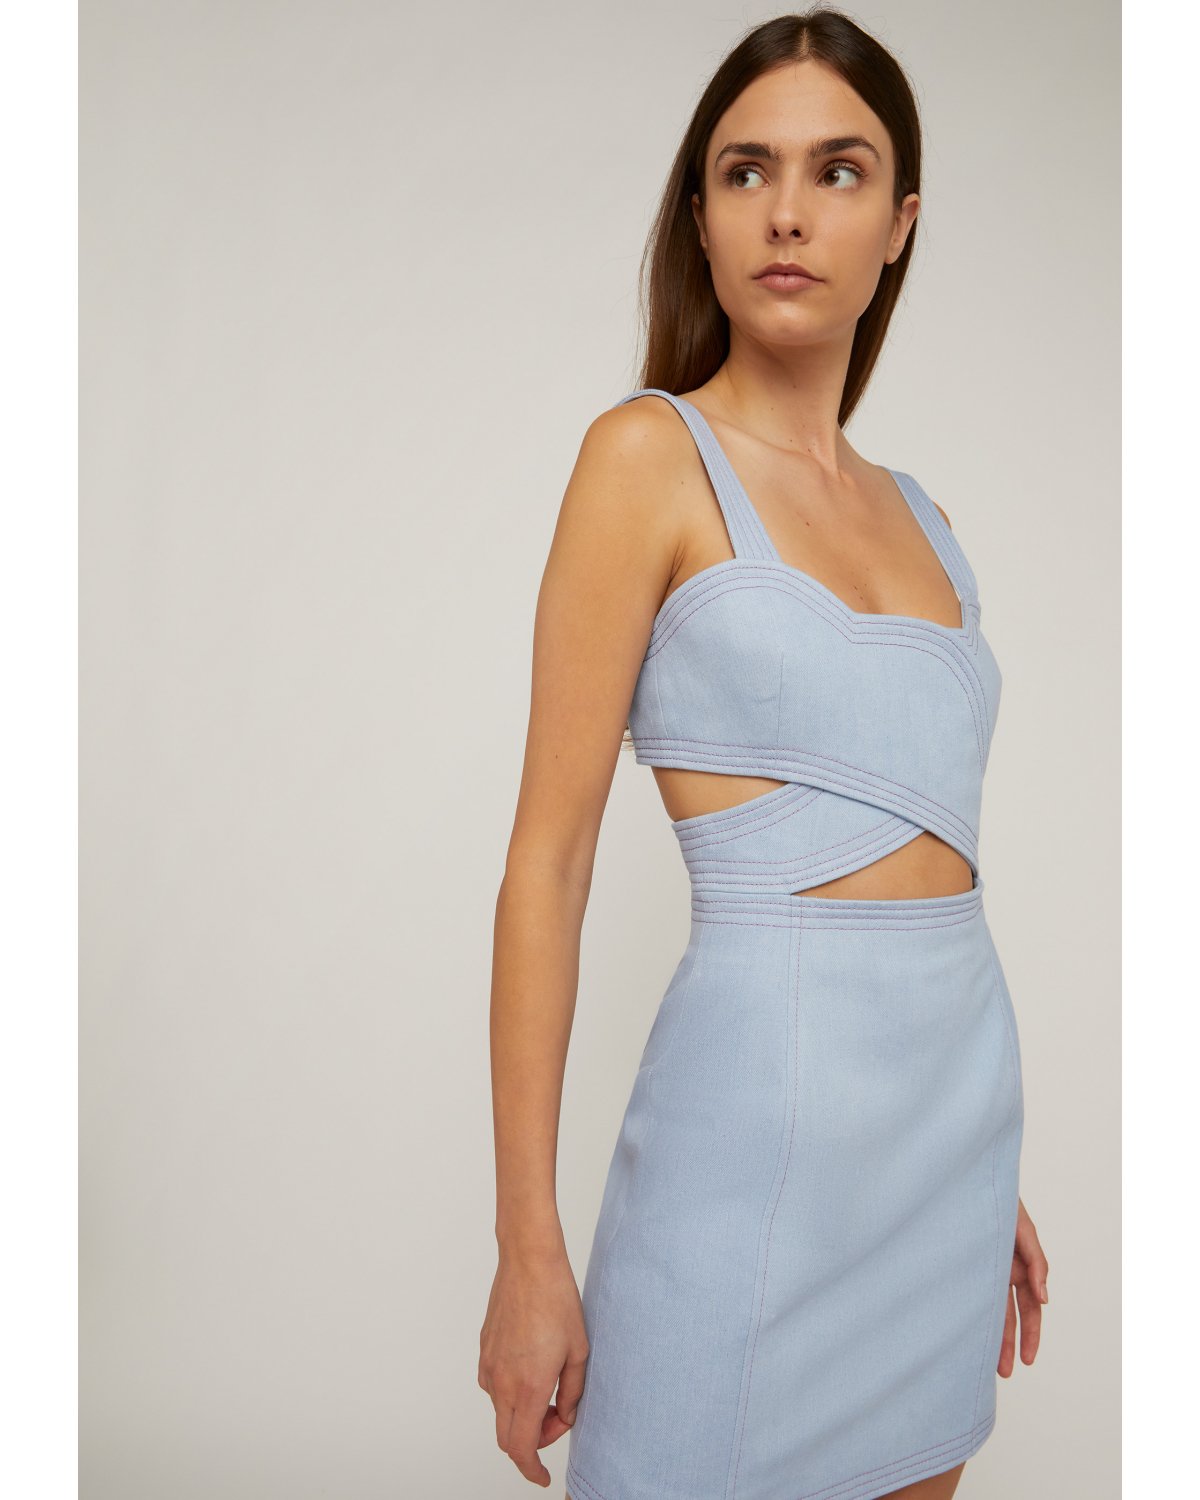 Mini dress with scalloped neckline and cut-out | Spring Summer 2023 Collection, 73_74, Cruise 2023 Collection, Warm weather wear, Ready to Wear, Spring days, Sale, Summer Sale, Mid season sale -40% | Genny